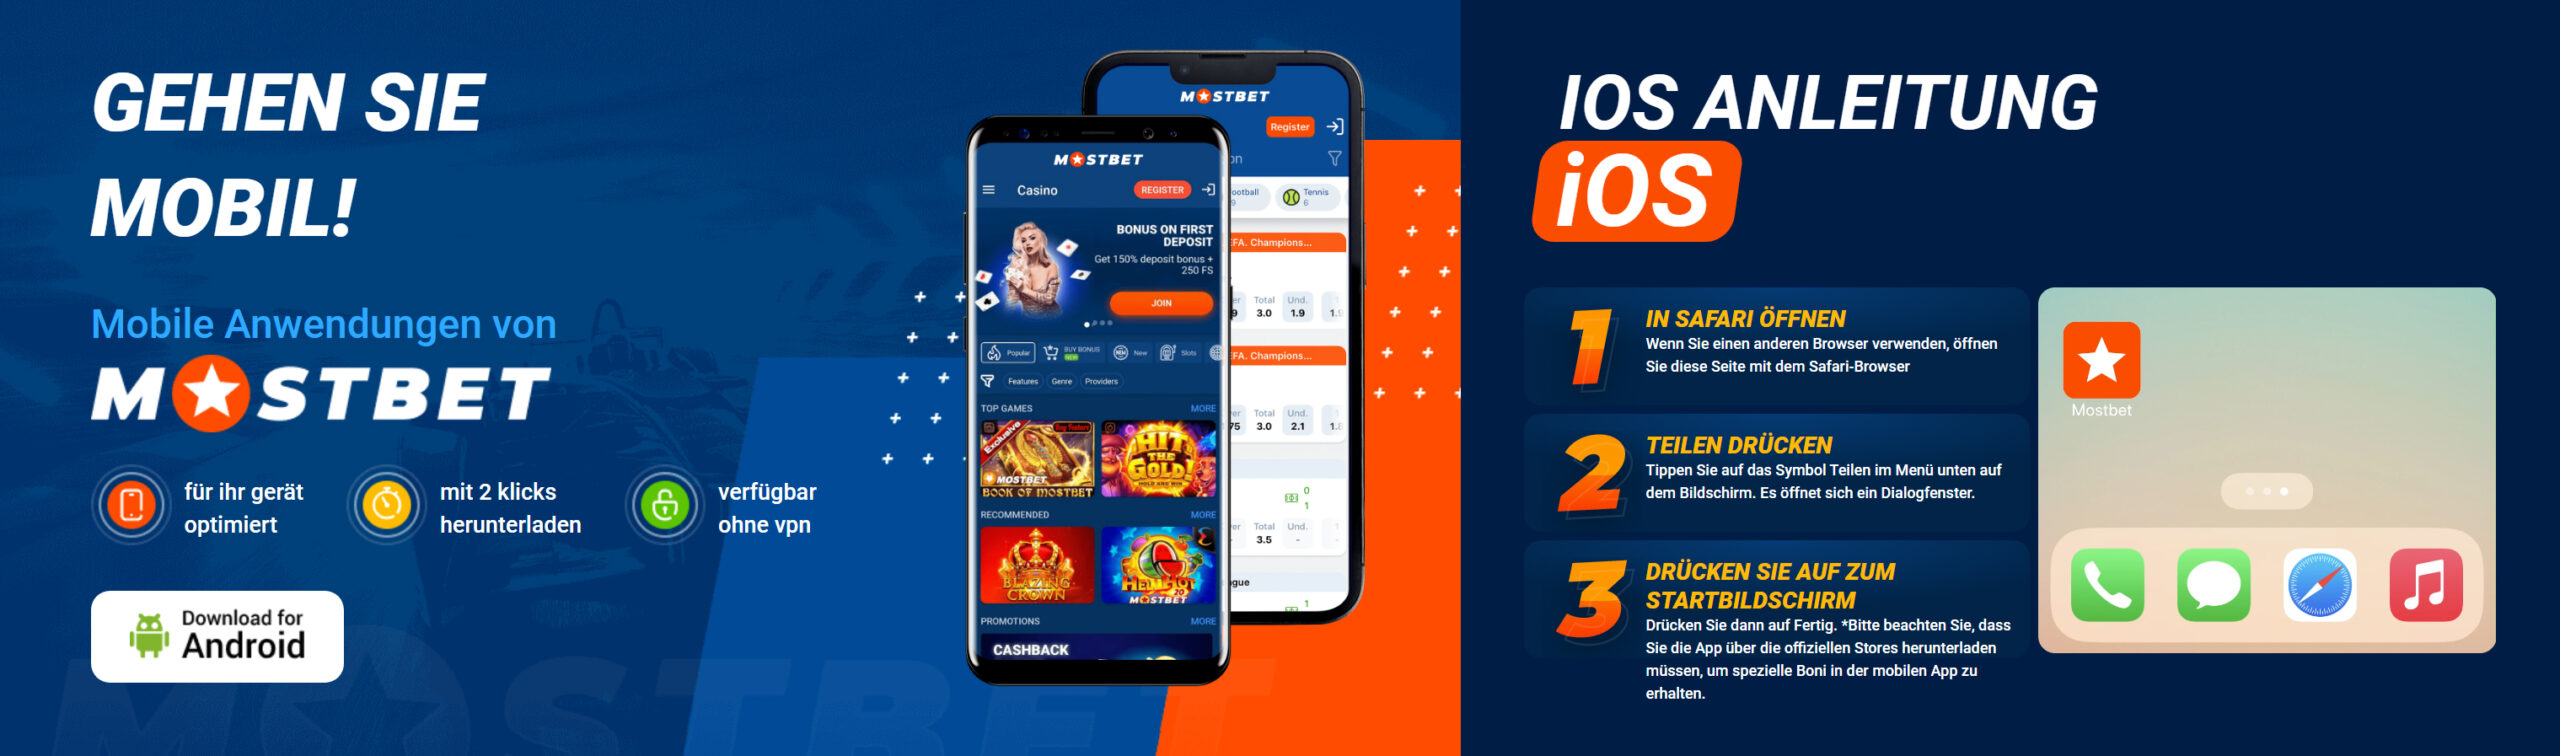 Mobile Anwendung Mostbet Android und iOS